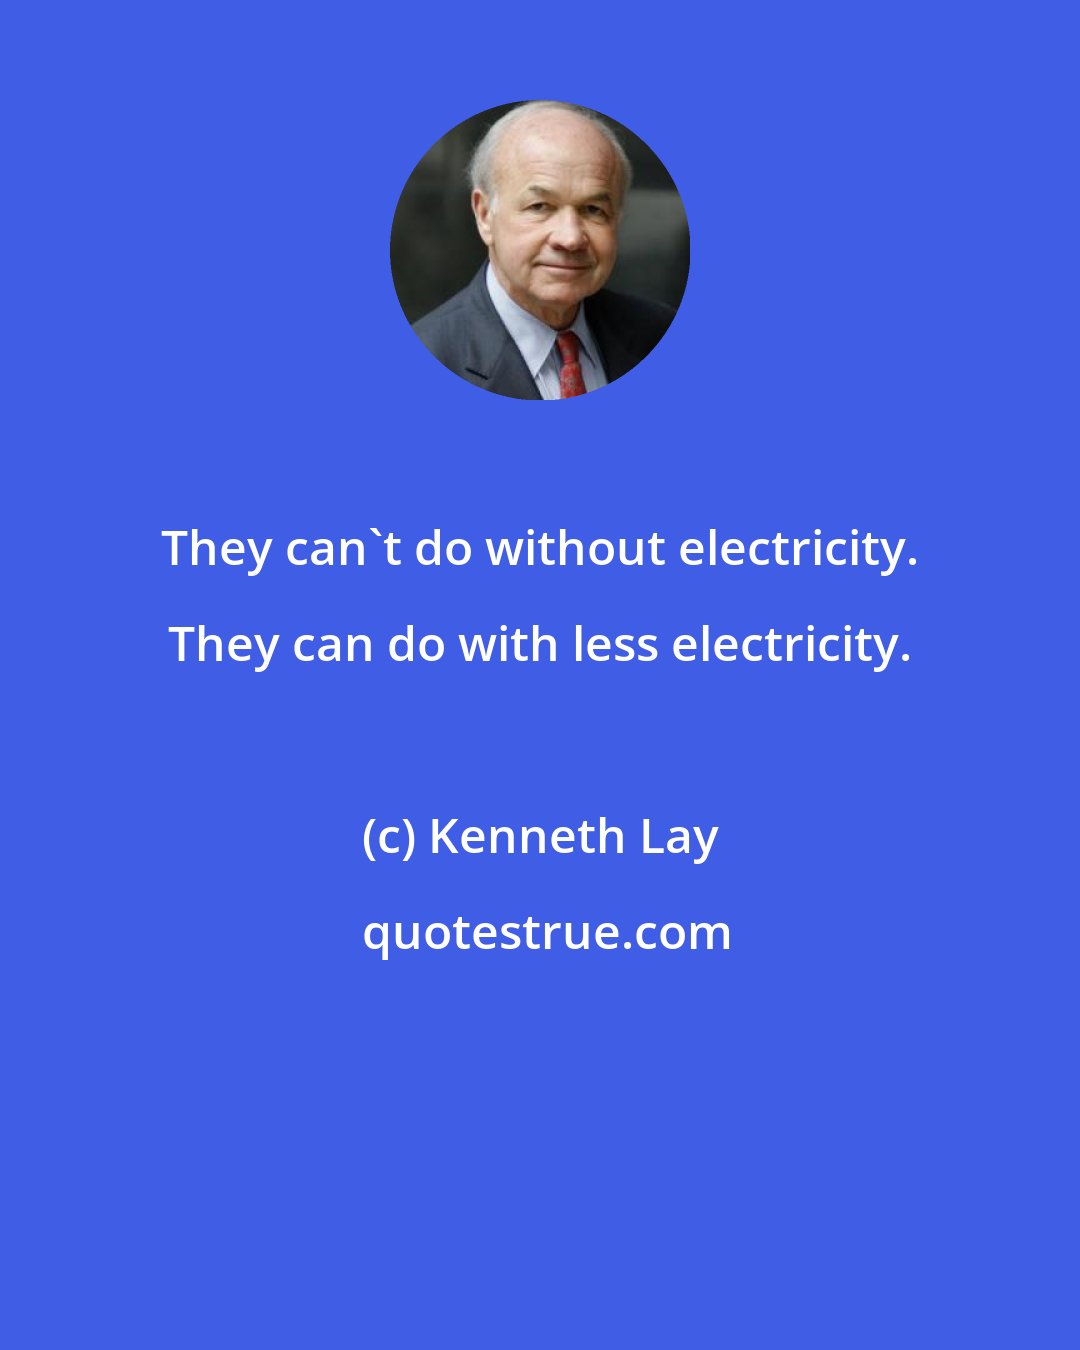 Kenneth Lay: They can't do without electricity. They can do with less electricity.